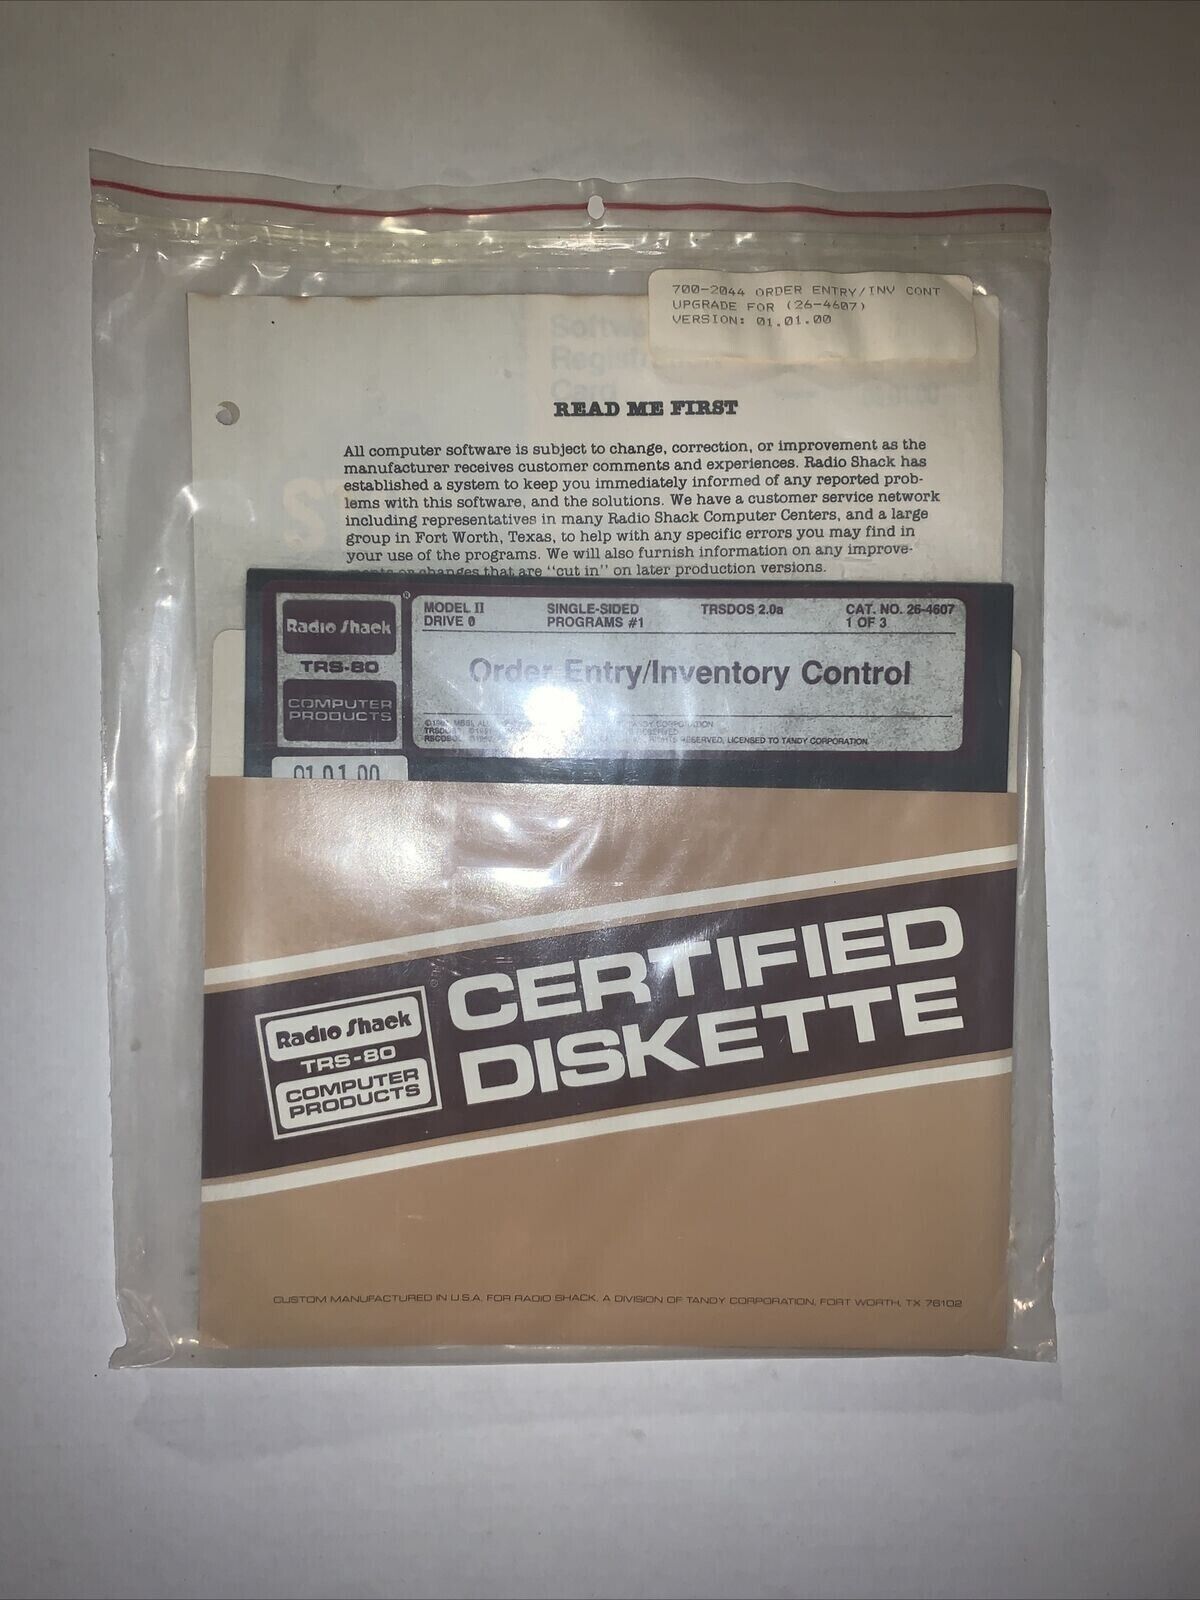 trs-80 model 2 inventory management No.26-4607 Very Rare Collectible S28